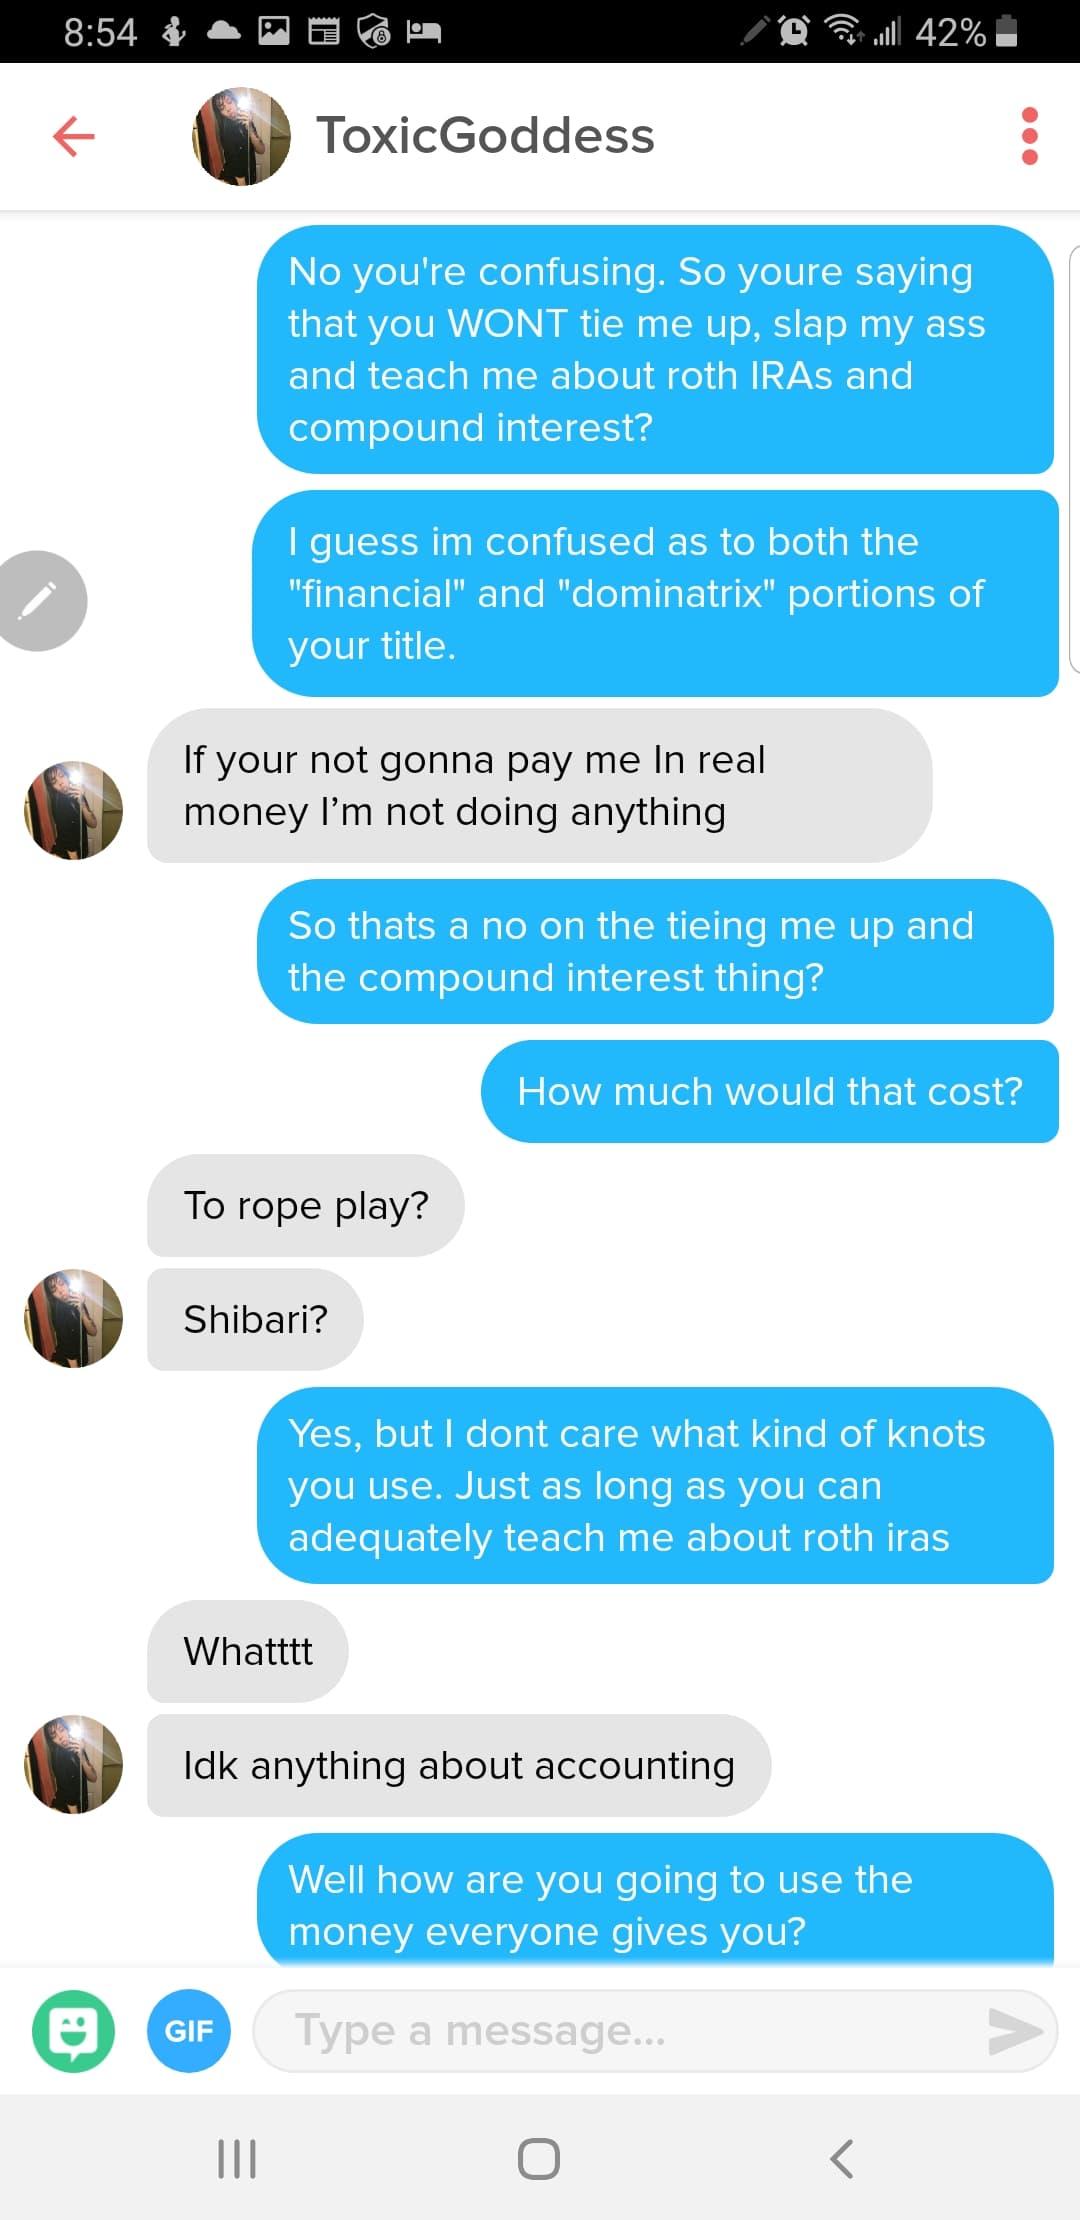 tinder gold digger - & O Pull 42% ToxicGoddess No you're confusing. So youre saying that you Wont tie me up, slap my ass and teach me about roth IRAs and compound interest? I guess im confused as to both the "financial" and "dominatrix" portions of your t